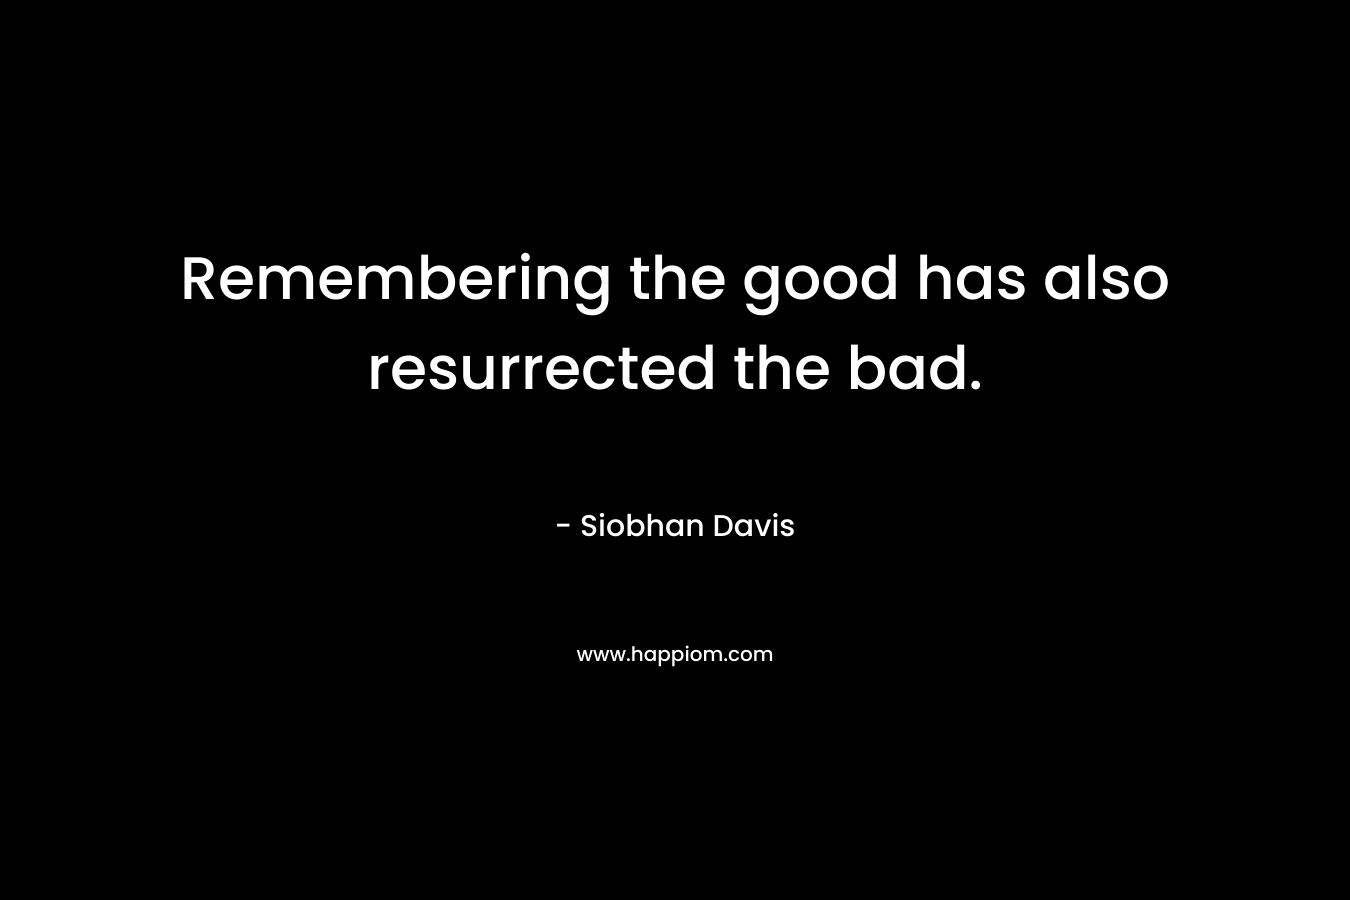 Remembering the good has also resurrected the bad. – Siobhan Davis